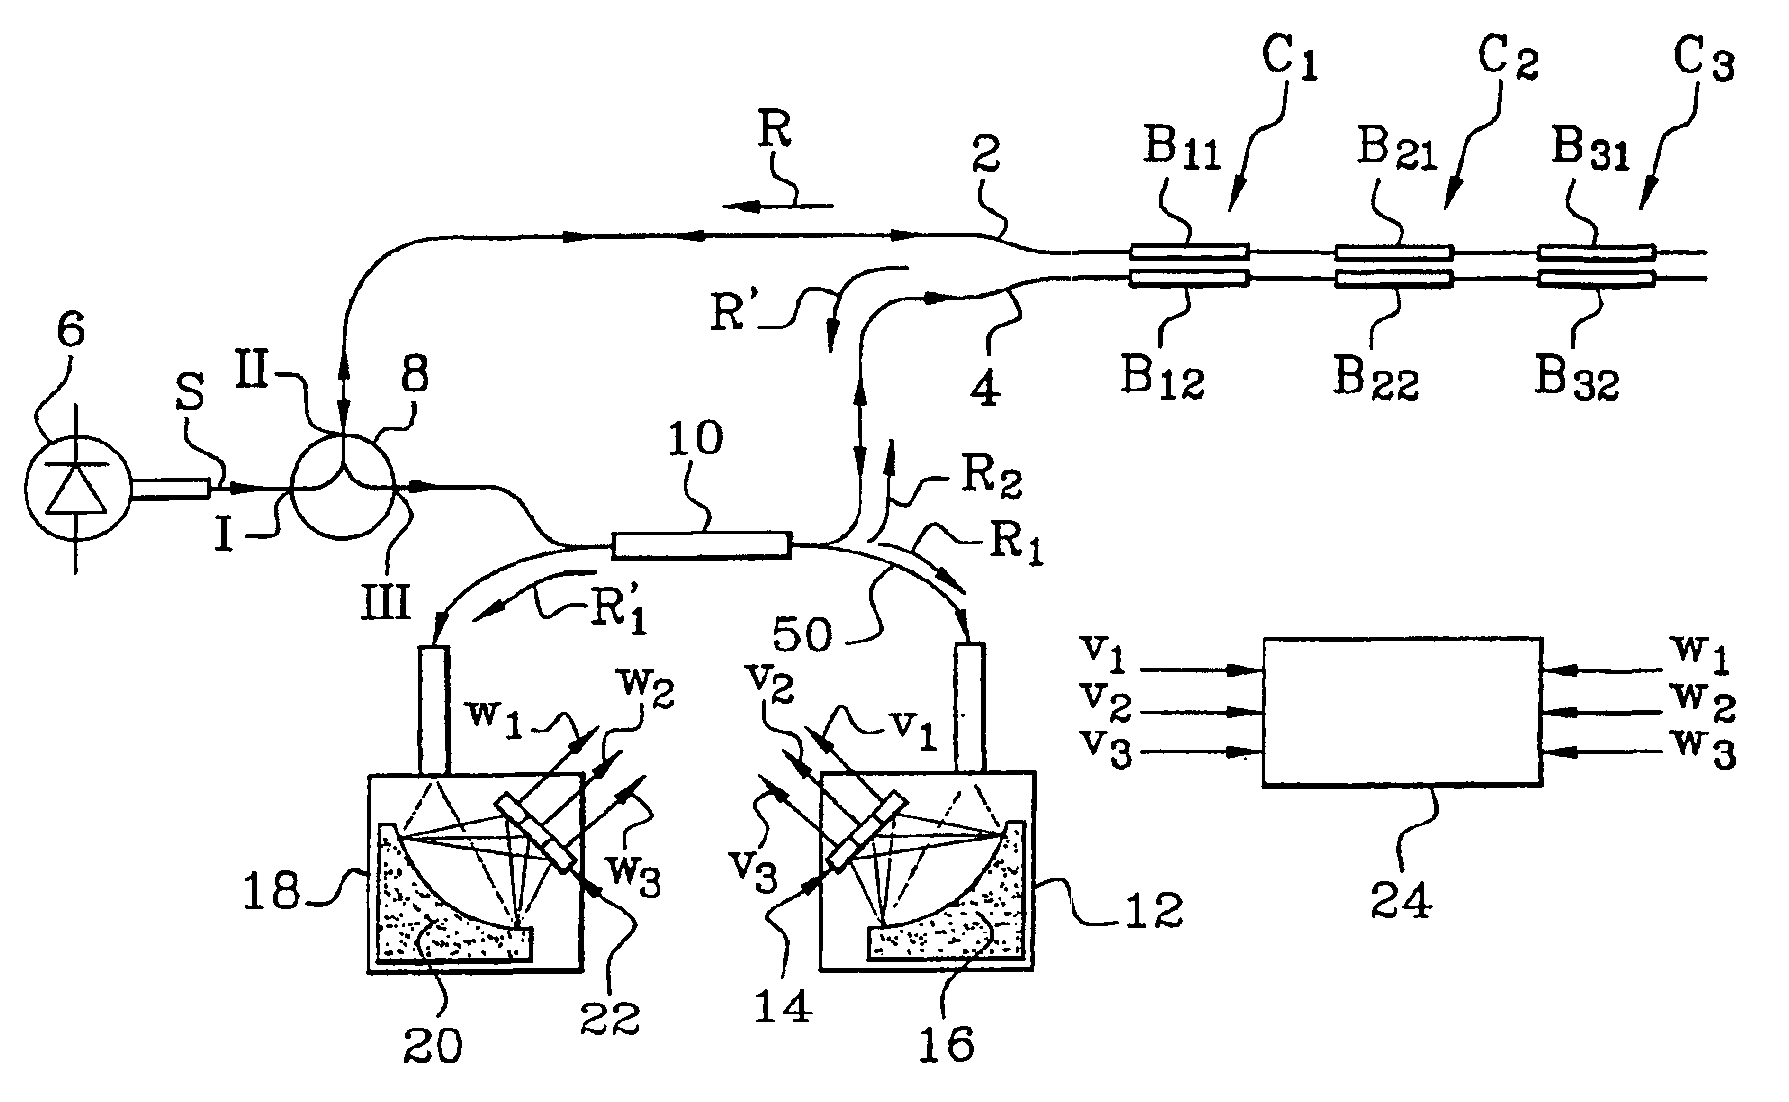 Differential measurement system based on the use of pairs of Bragg gratings